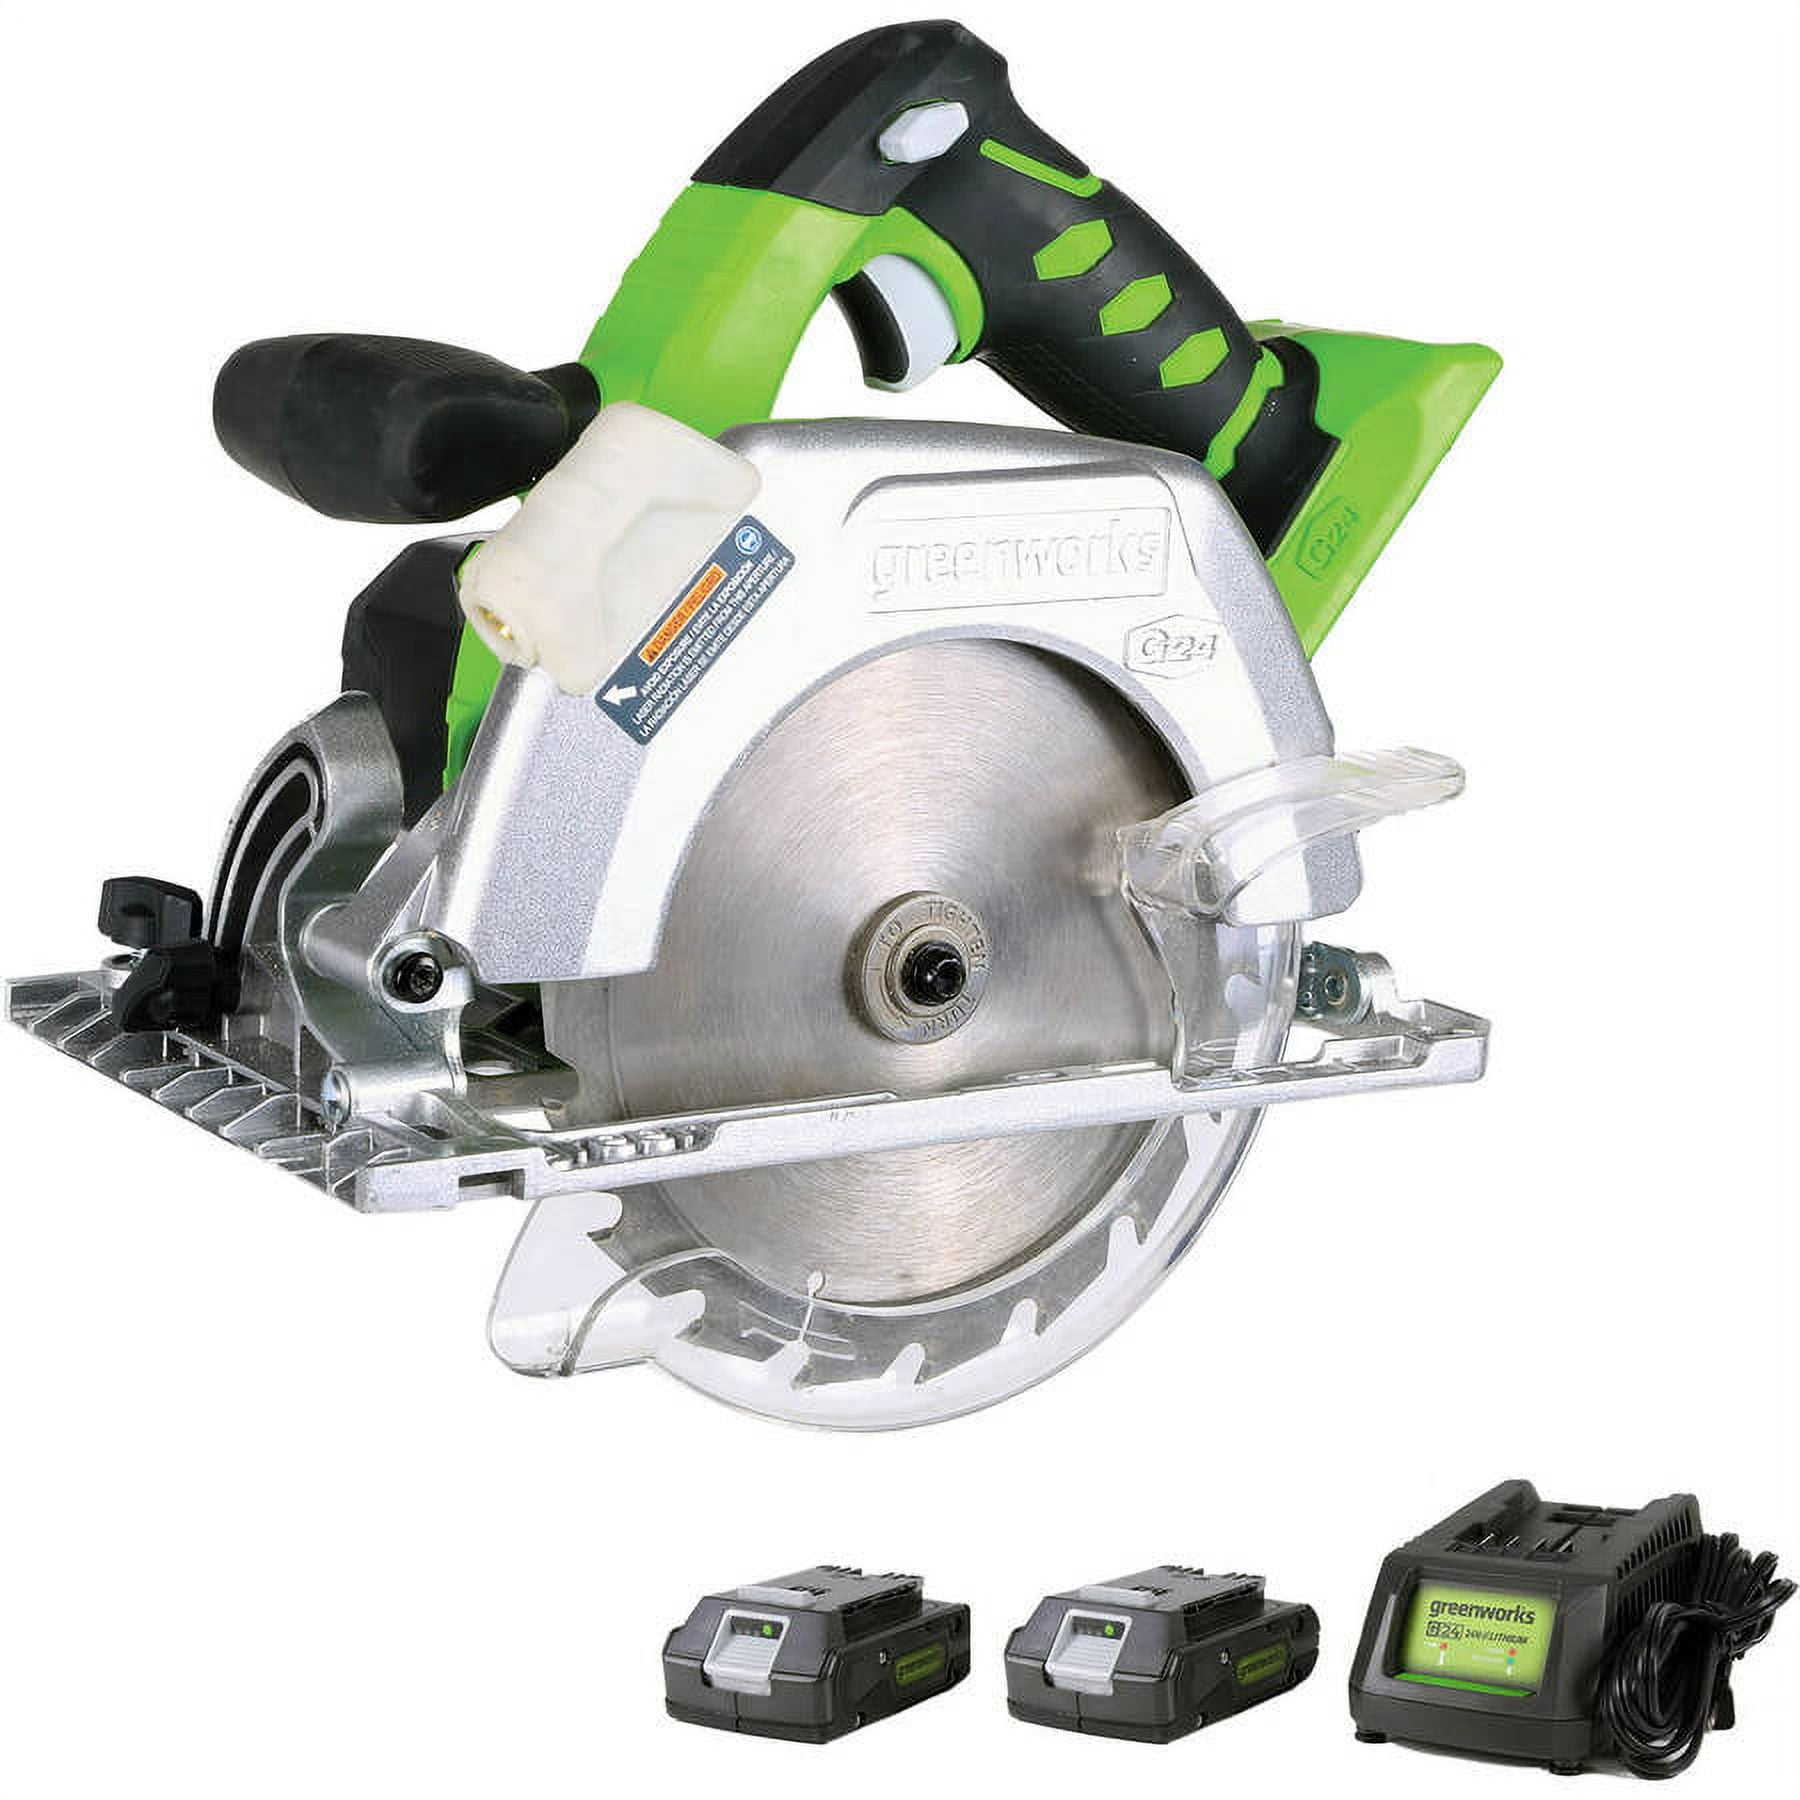 Greenworks 24V Brushless 6-1/2 Circular Saw Kit with 24V 2Ah Battery and Charger